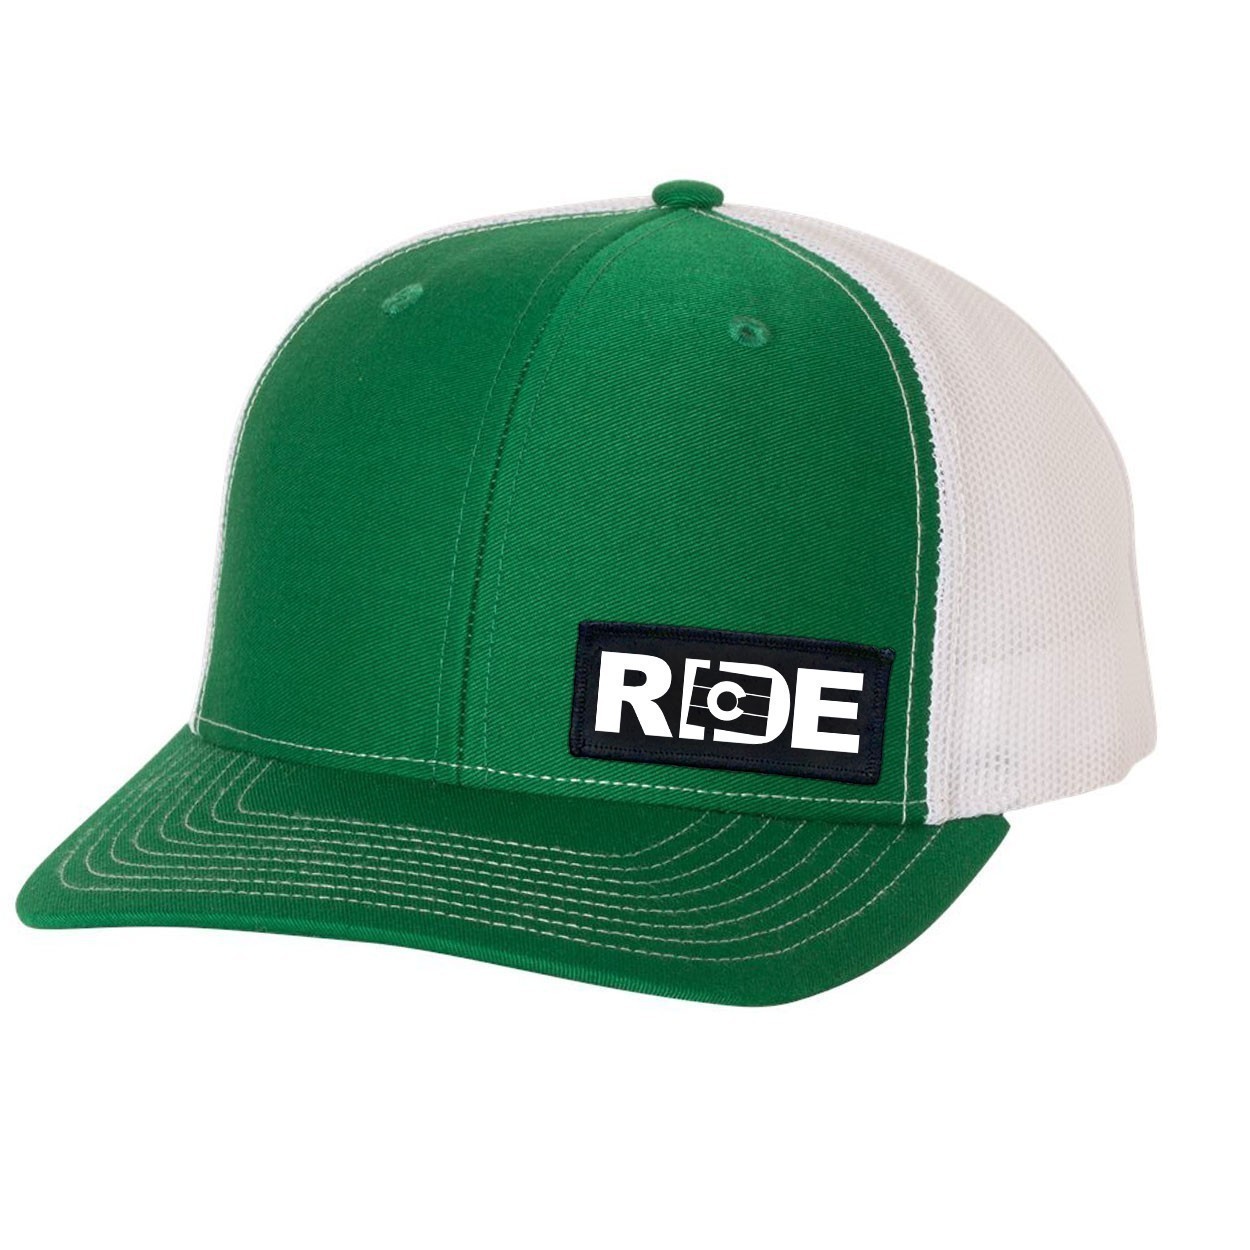 Ride Colorado Night Out Woven Patch Snapback Trucker Hat Green/White (White Logo)